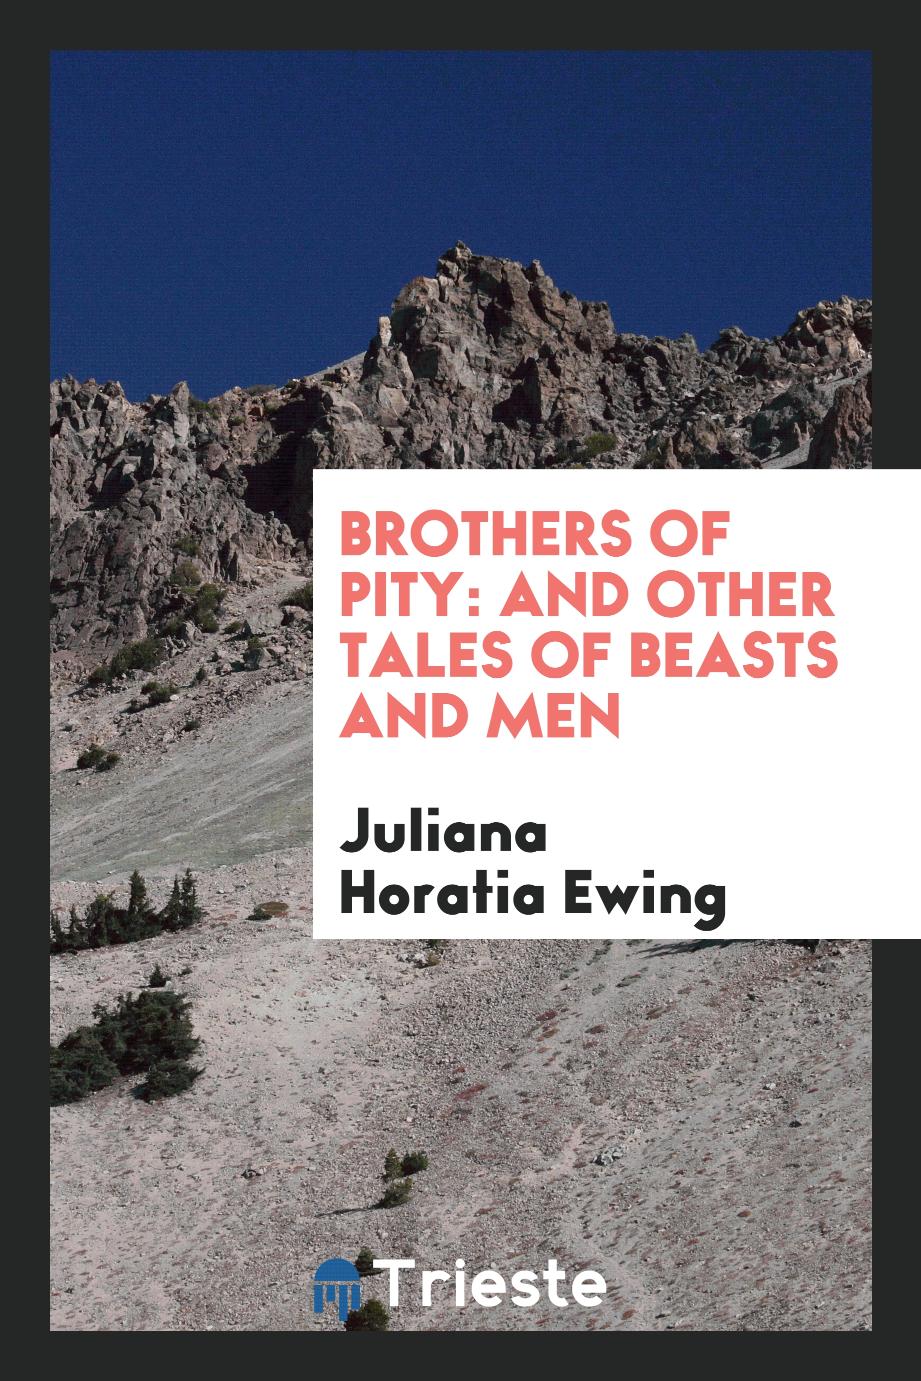 Juliana Horatia Ewing - Brothers of Pity: and other tales of beasts and men